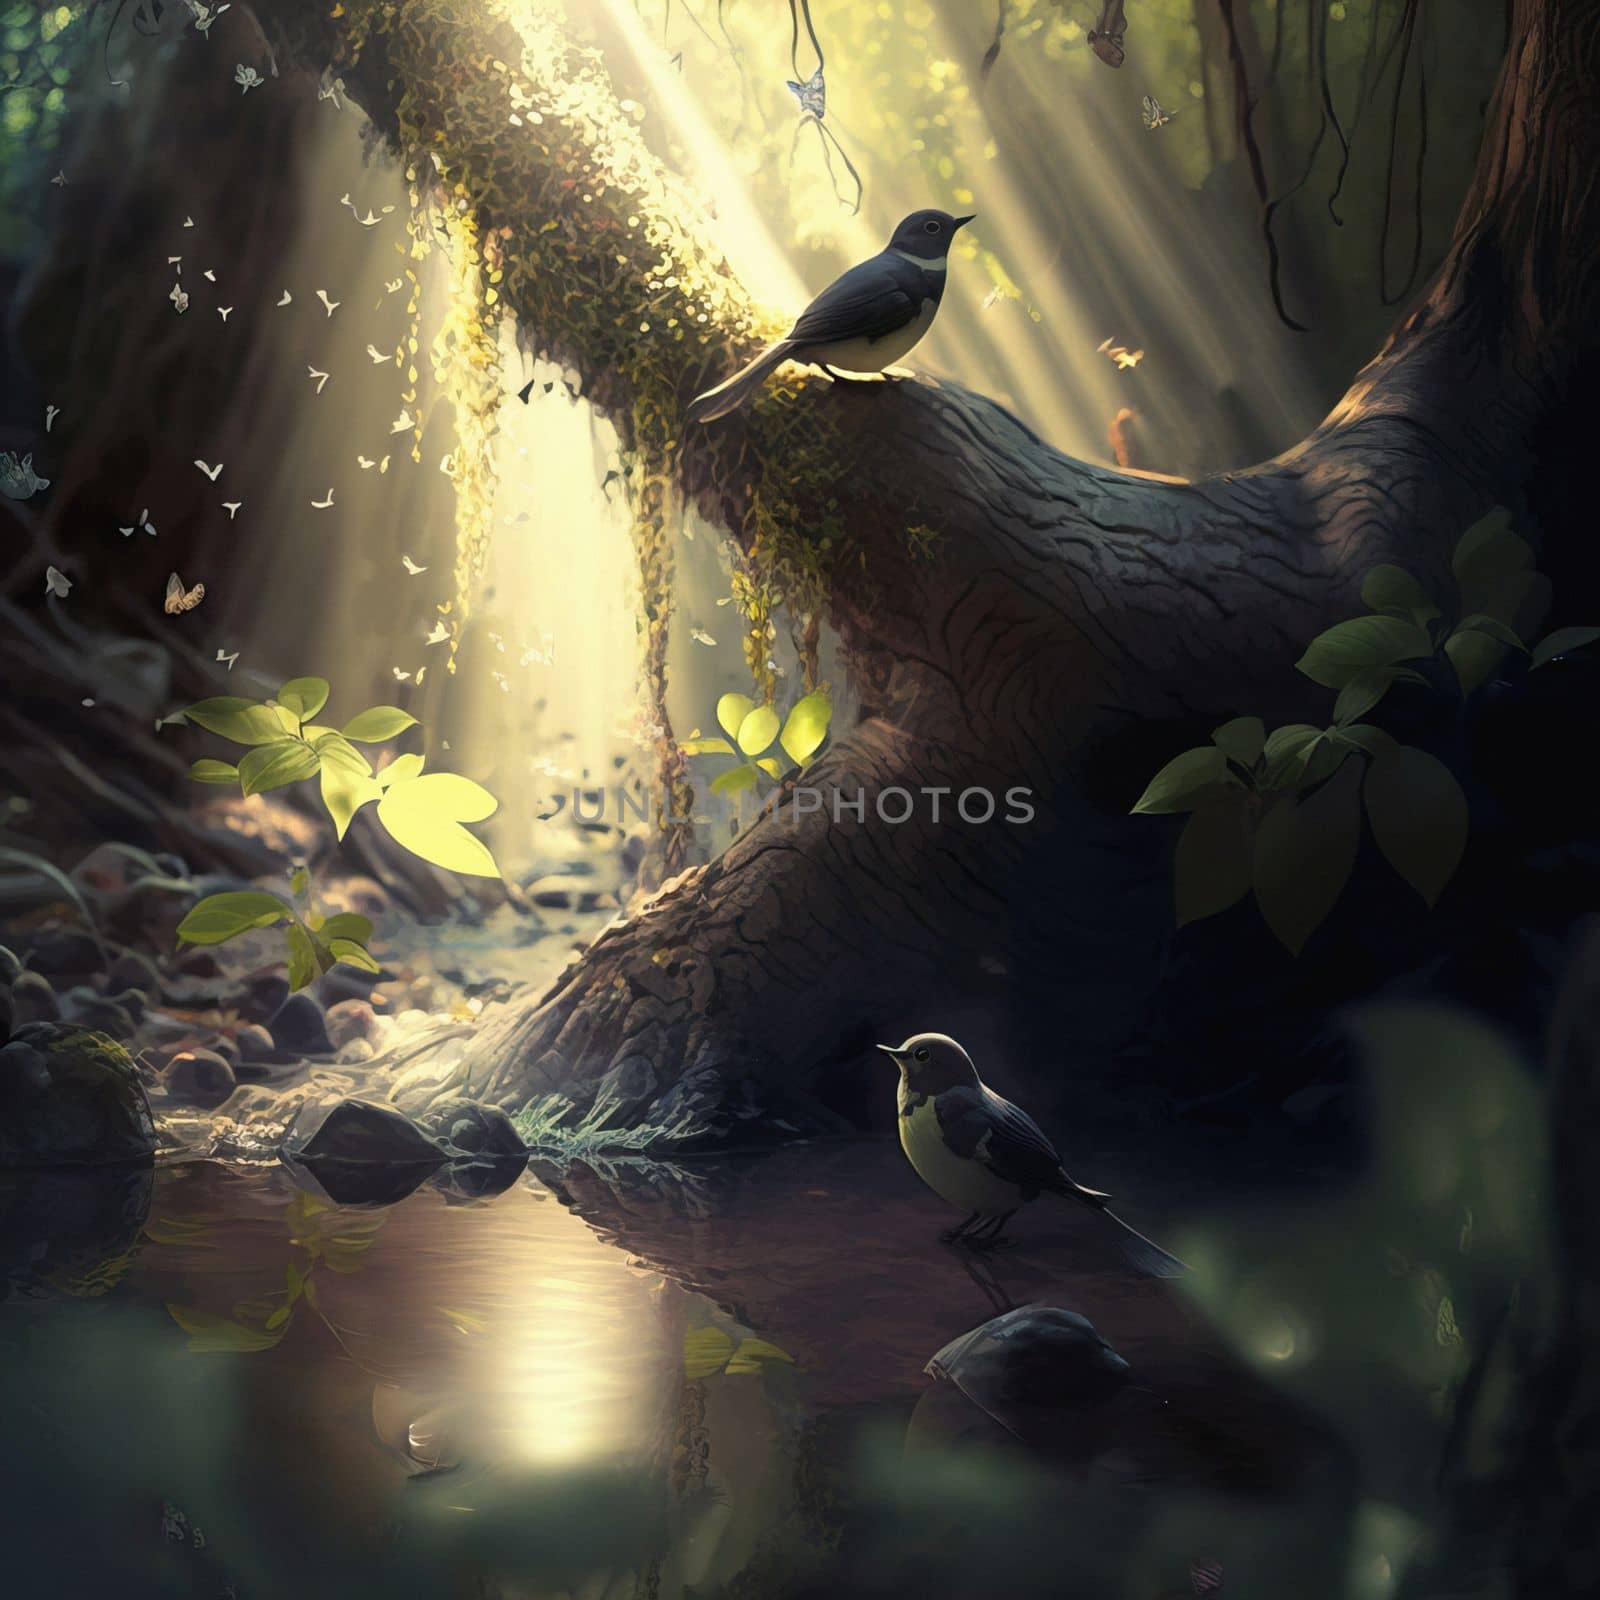 Illustration of fantasy forest with birds and flying butterfly under river. Photo manipulation. 3d rendering. download image